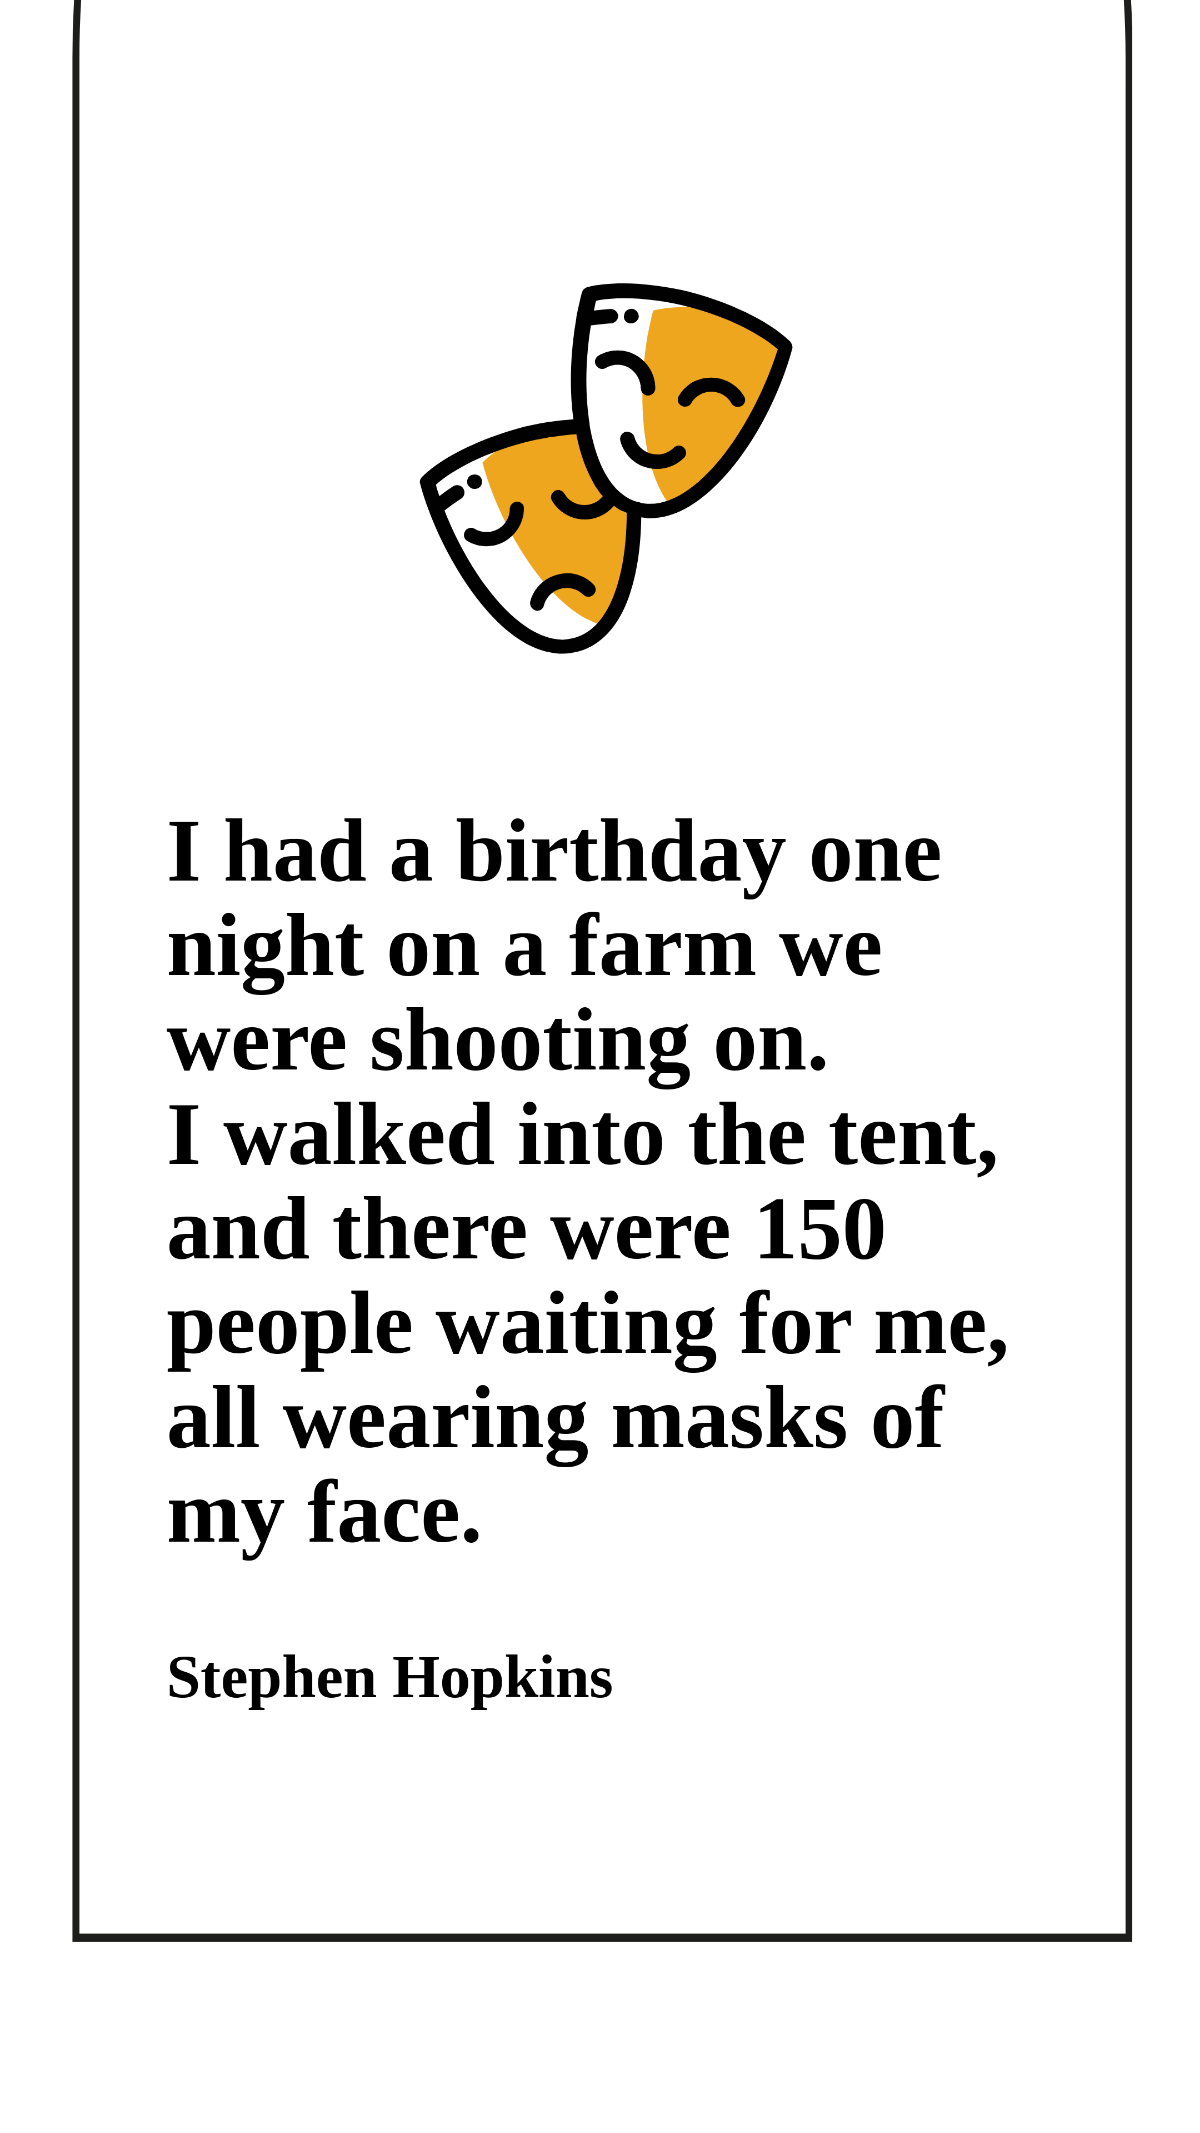 Stephen Hopkins - I had a birthday one night on a farm we were shooting on. I walked into the tent, and there were 150 people waiting for me, all wearing masks of my face.